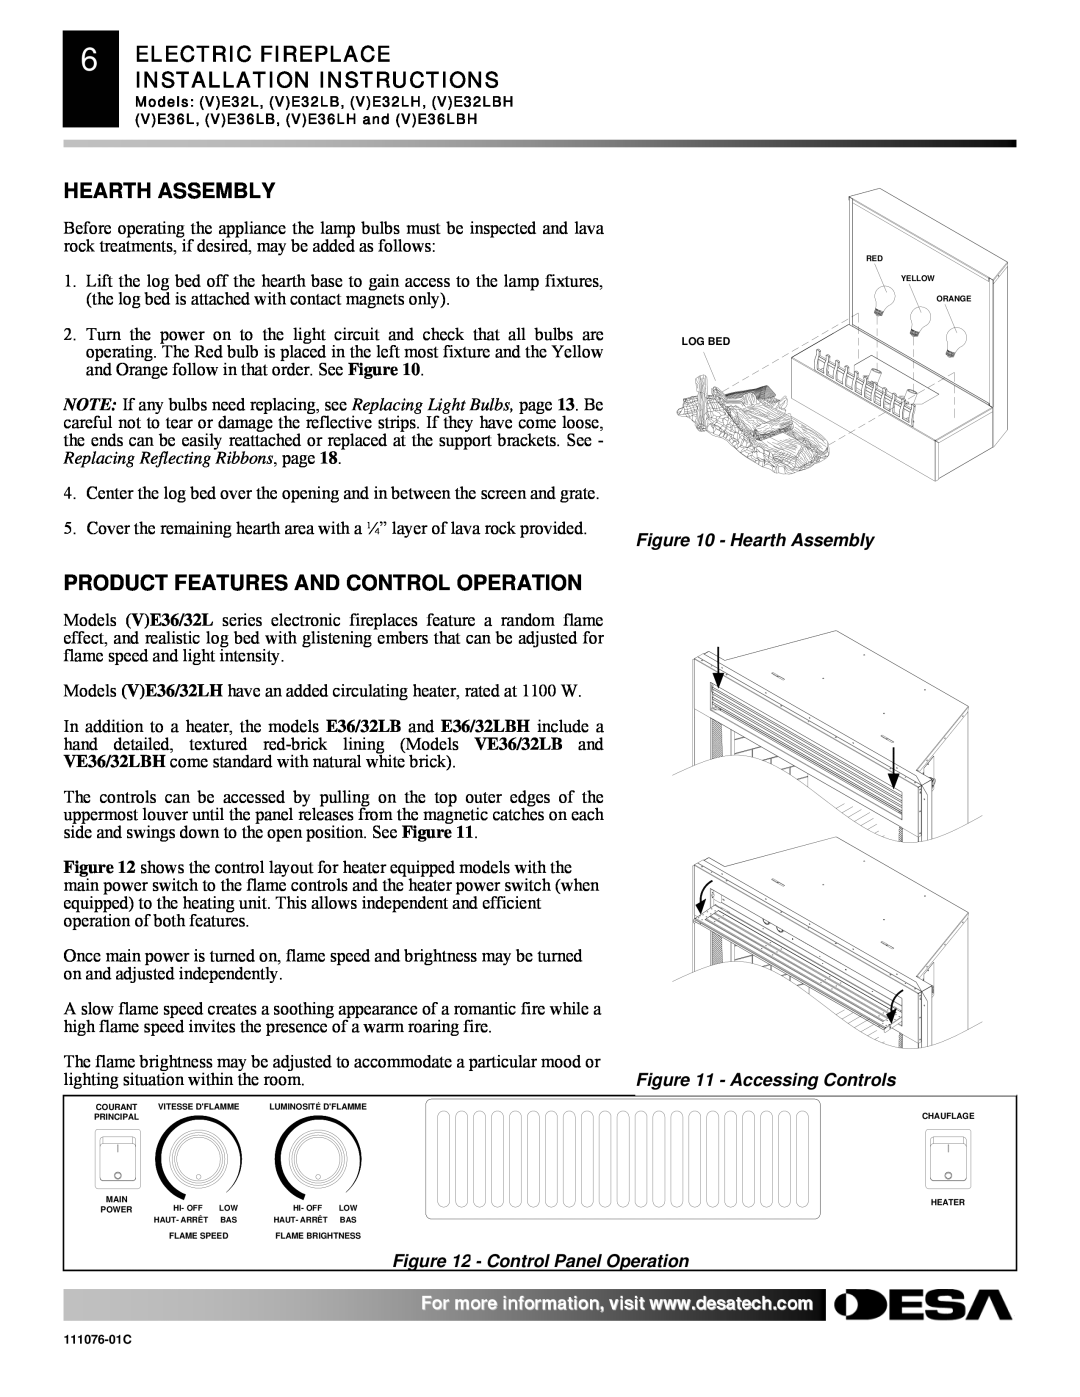 Desa E32, VE36, VE32, E36(L)(B)(H) Electric Fireplace, Installation Instructions, Hearth Assembly, Accessing Controls 